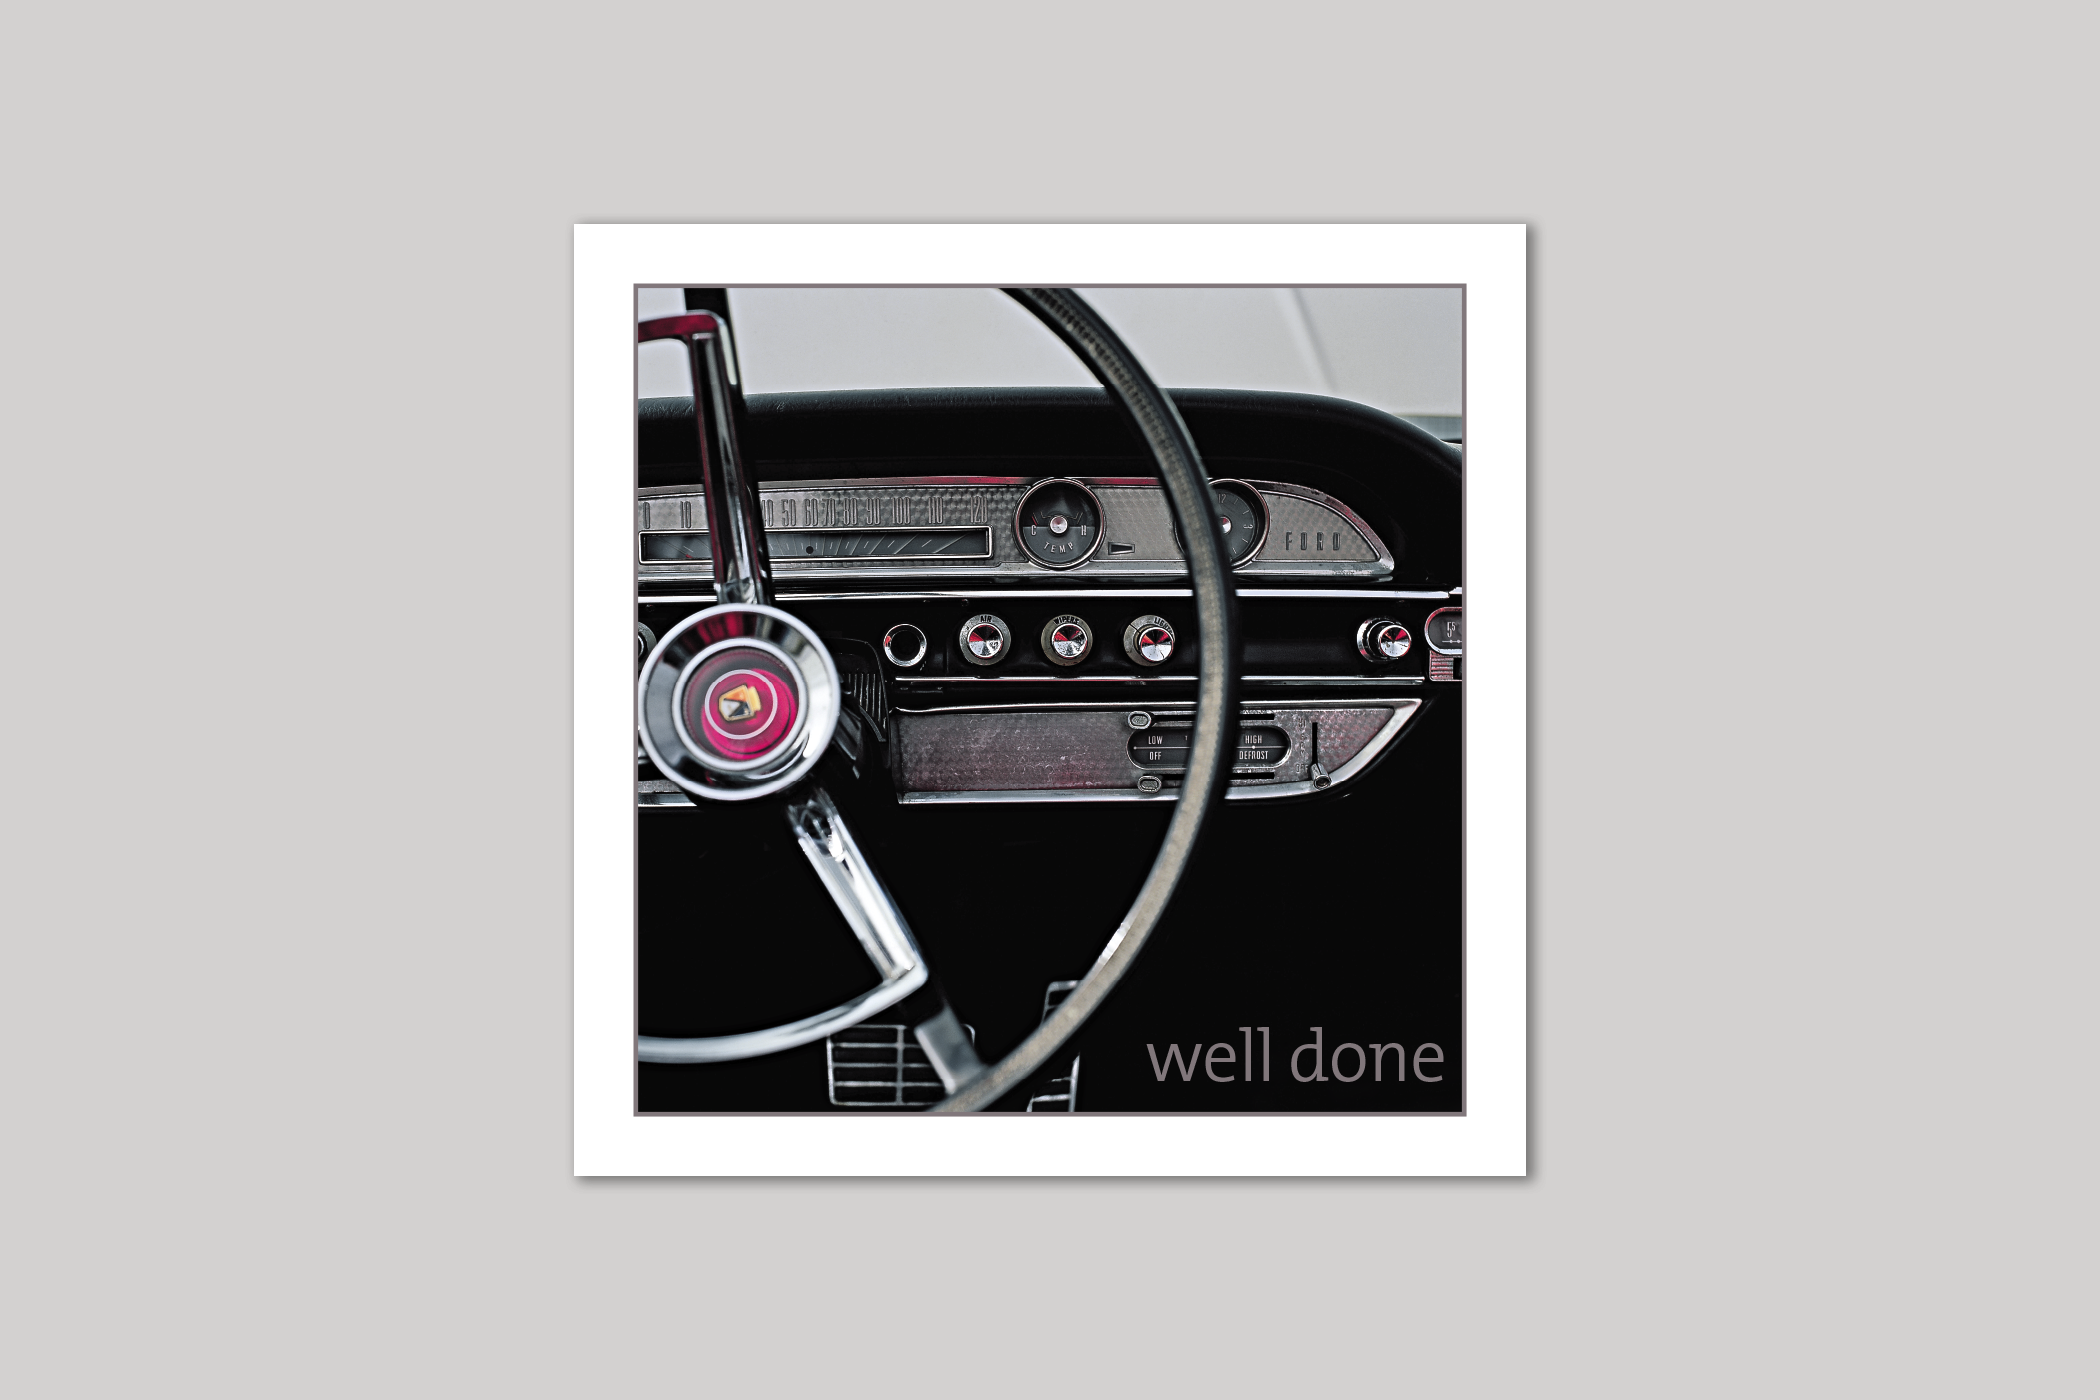 Vintage Car driving test card from Exposure Silver Edition range of greeting cards by Icon.